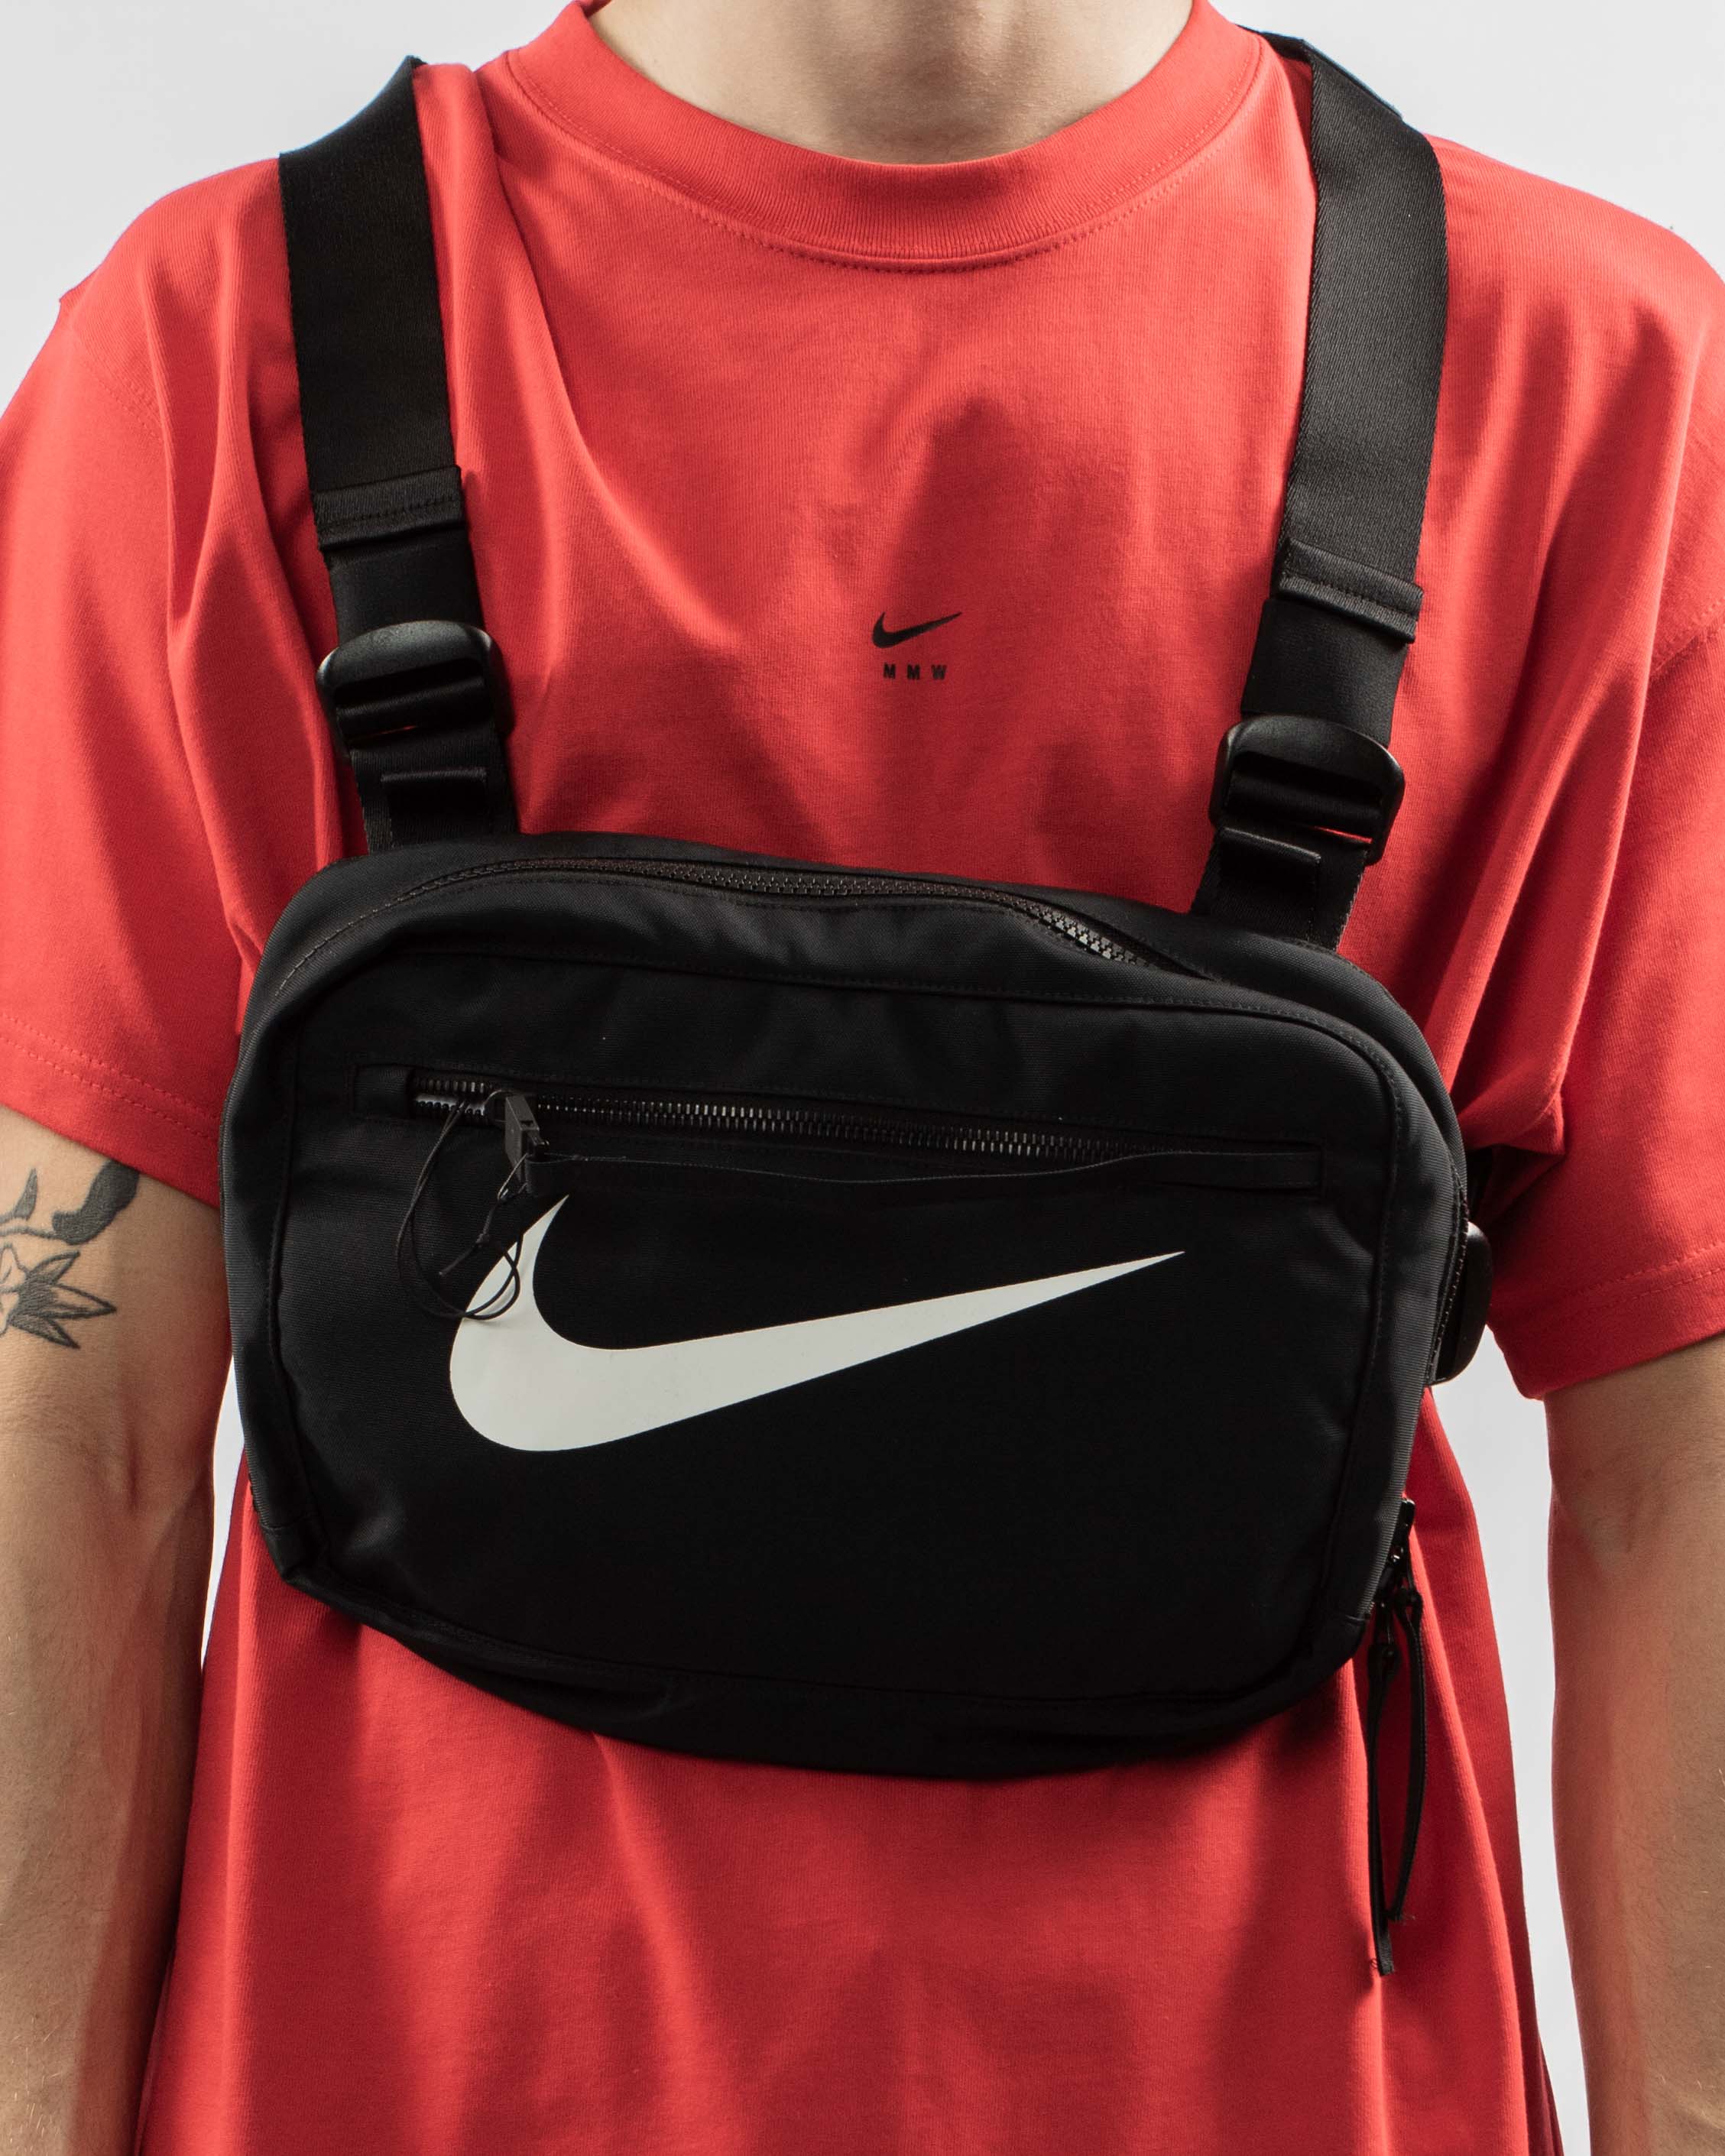 M NRG x SE Chest Rig 2.0 by Nike